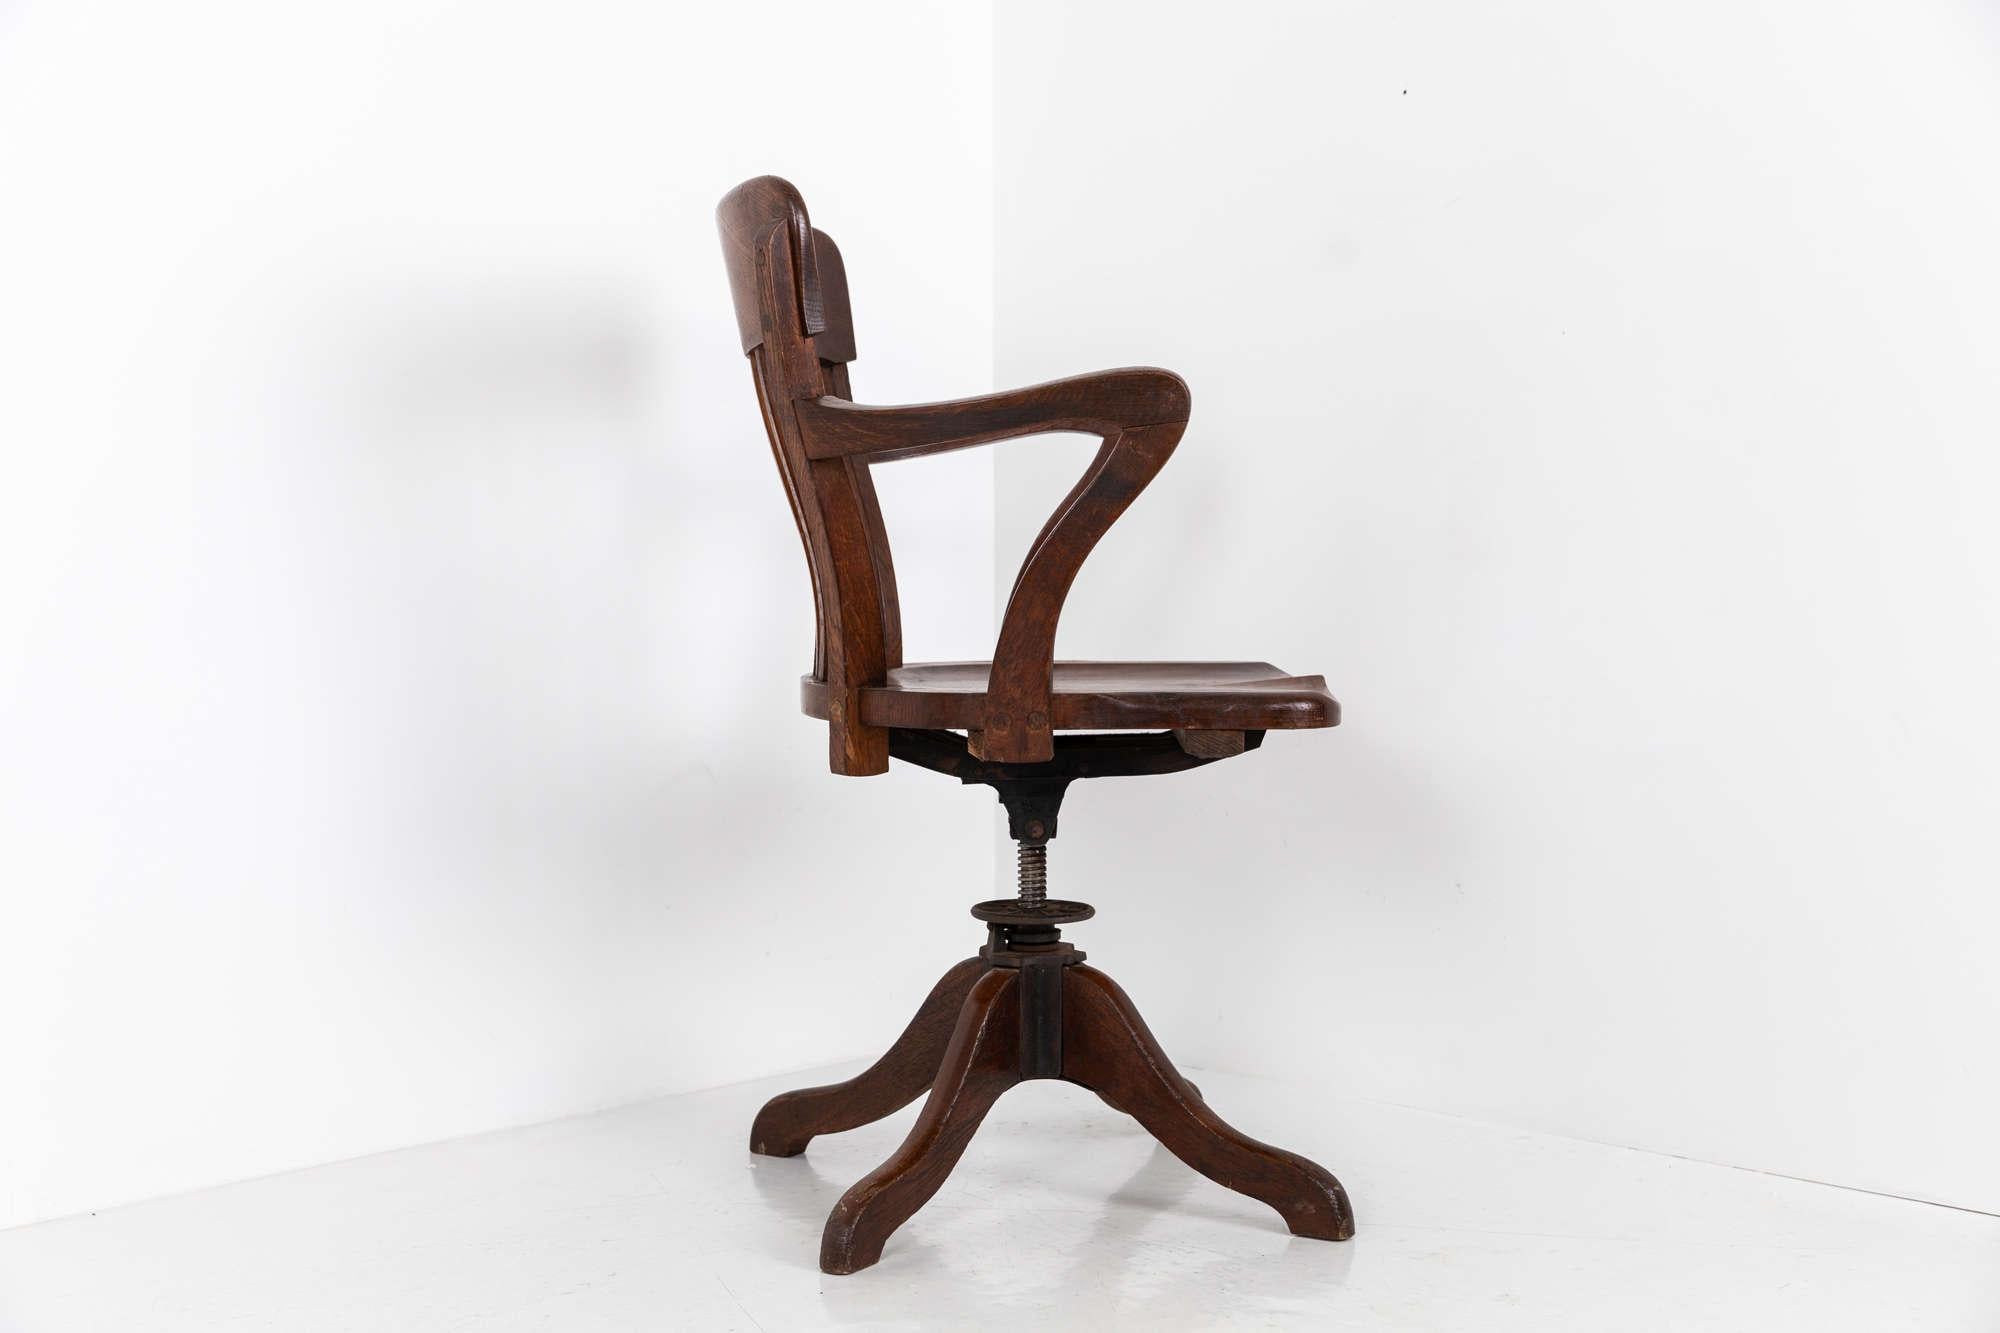 

Oak framed desk chair of exceptional quality made in France by Scholz Star. c.1940

Swivel base with ergonomic shaped seat. Original makers label intact to rear of chair.
